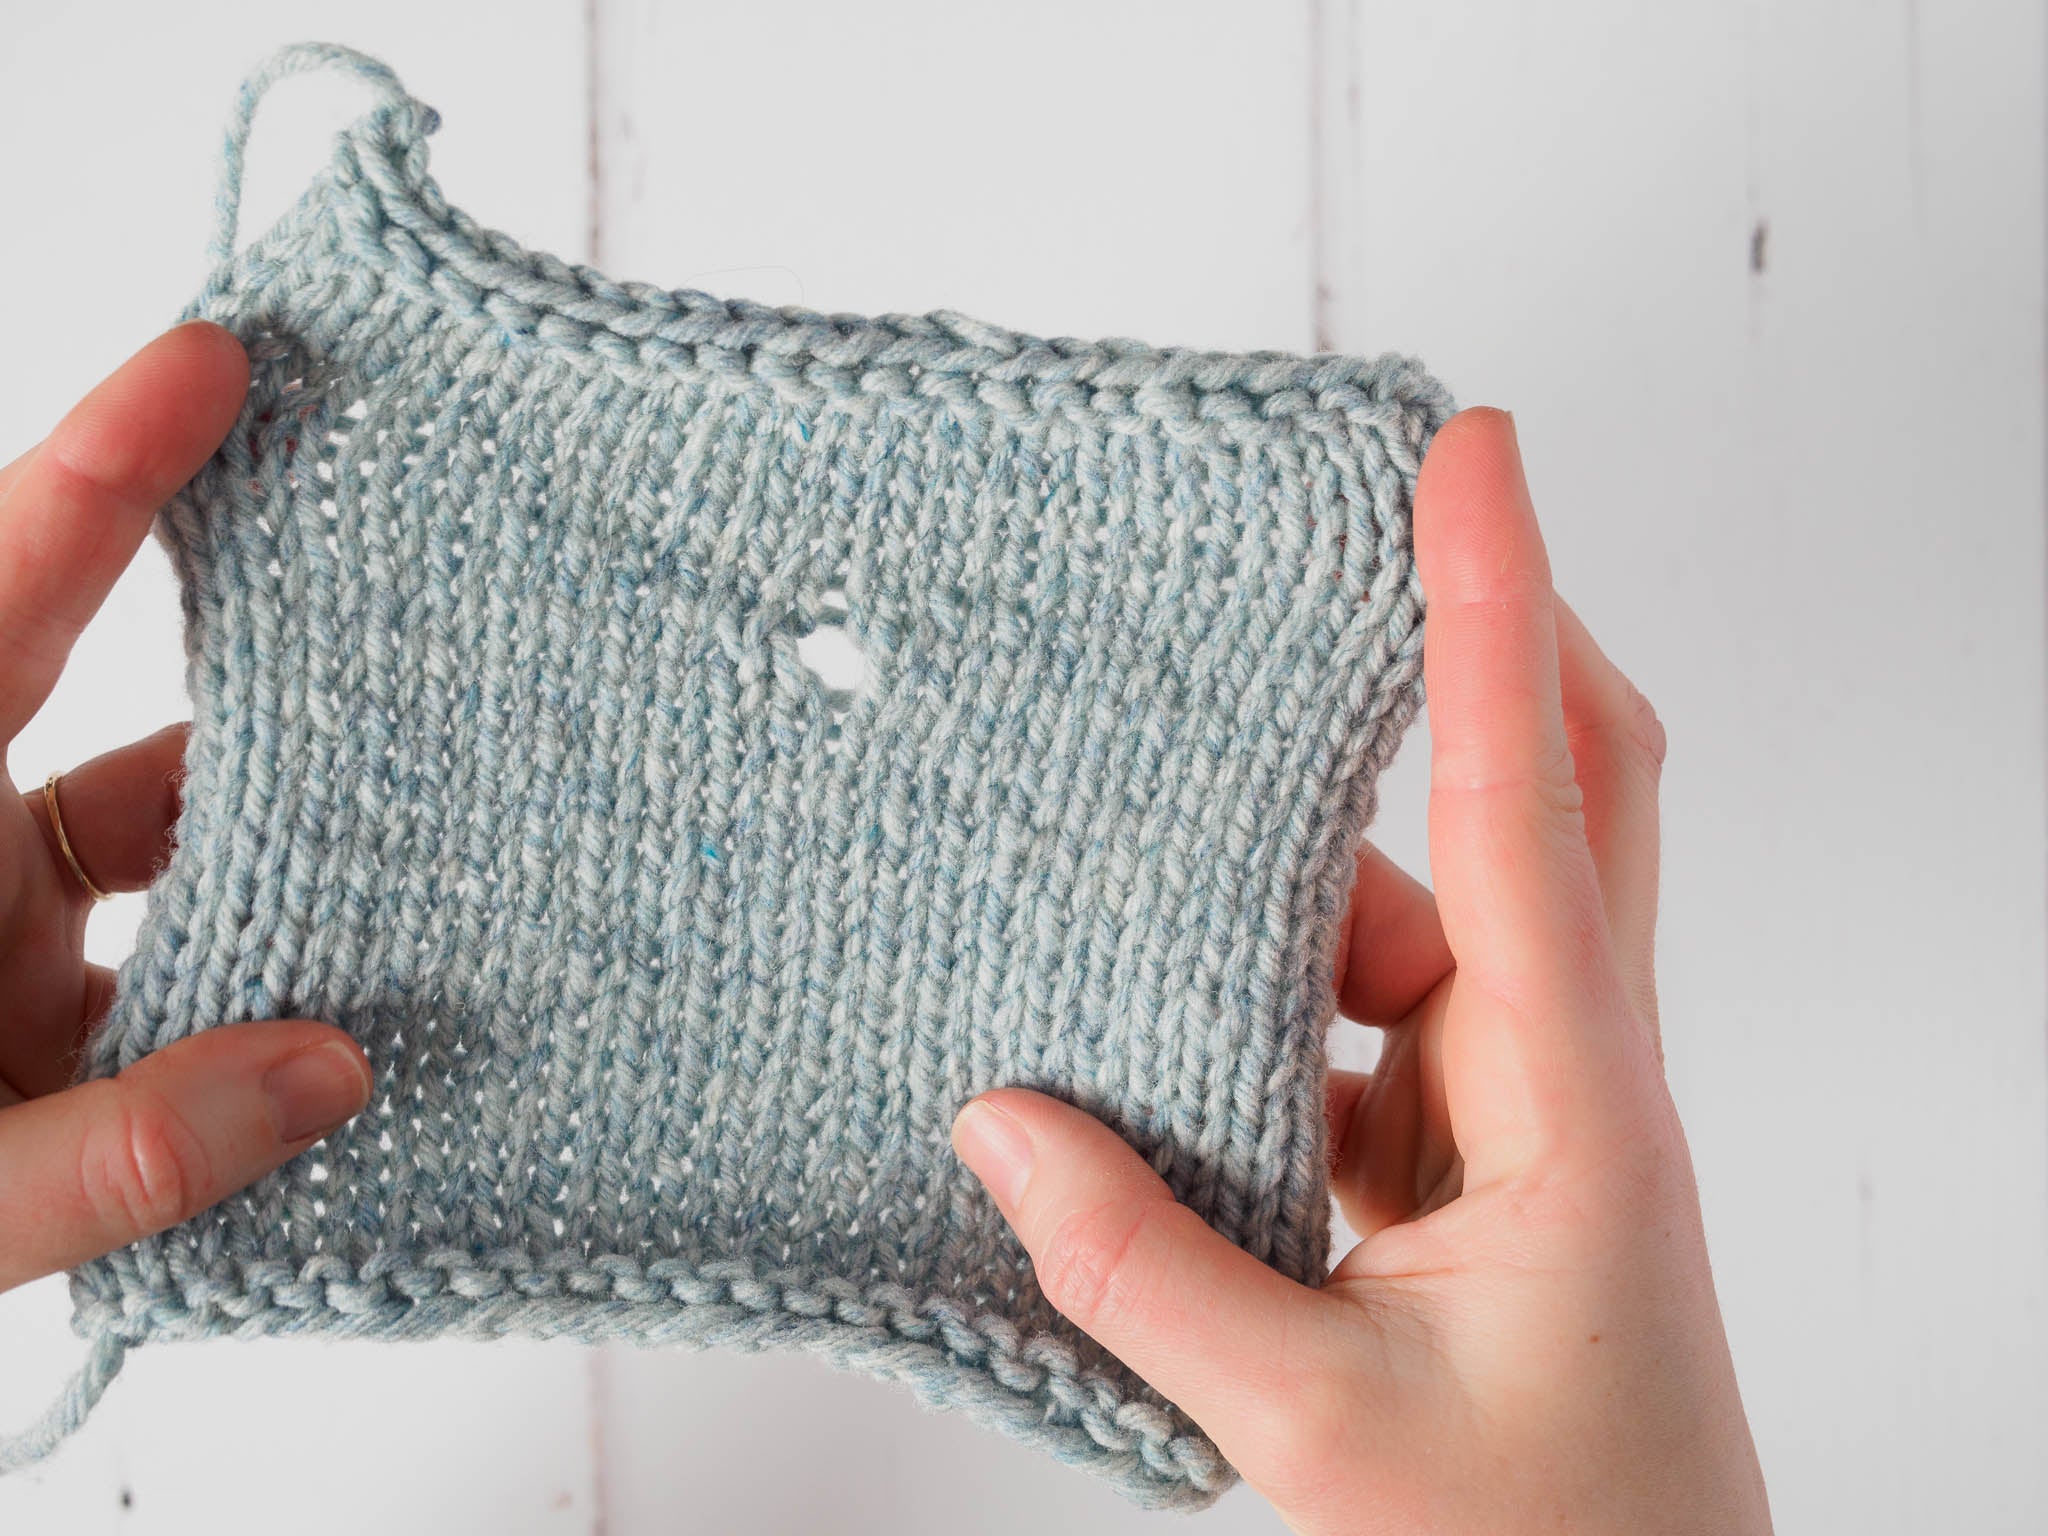 A pale blue swatch with a single yarn over formed in the centre, appearing as a small hole in the fabric. The swatch is held up and being stretched out by a hand on either side.